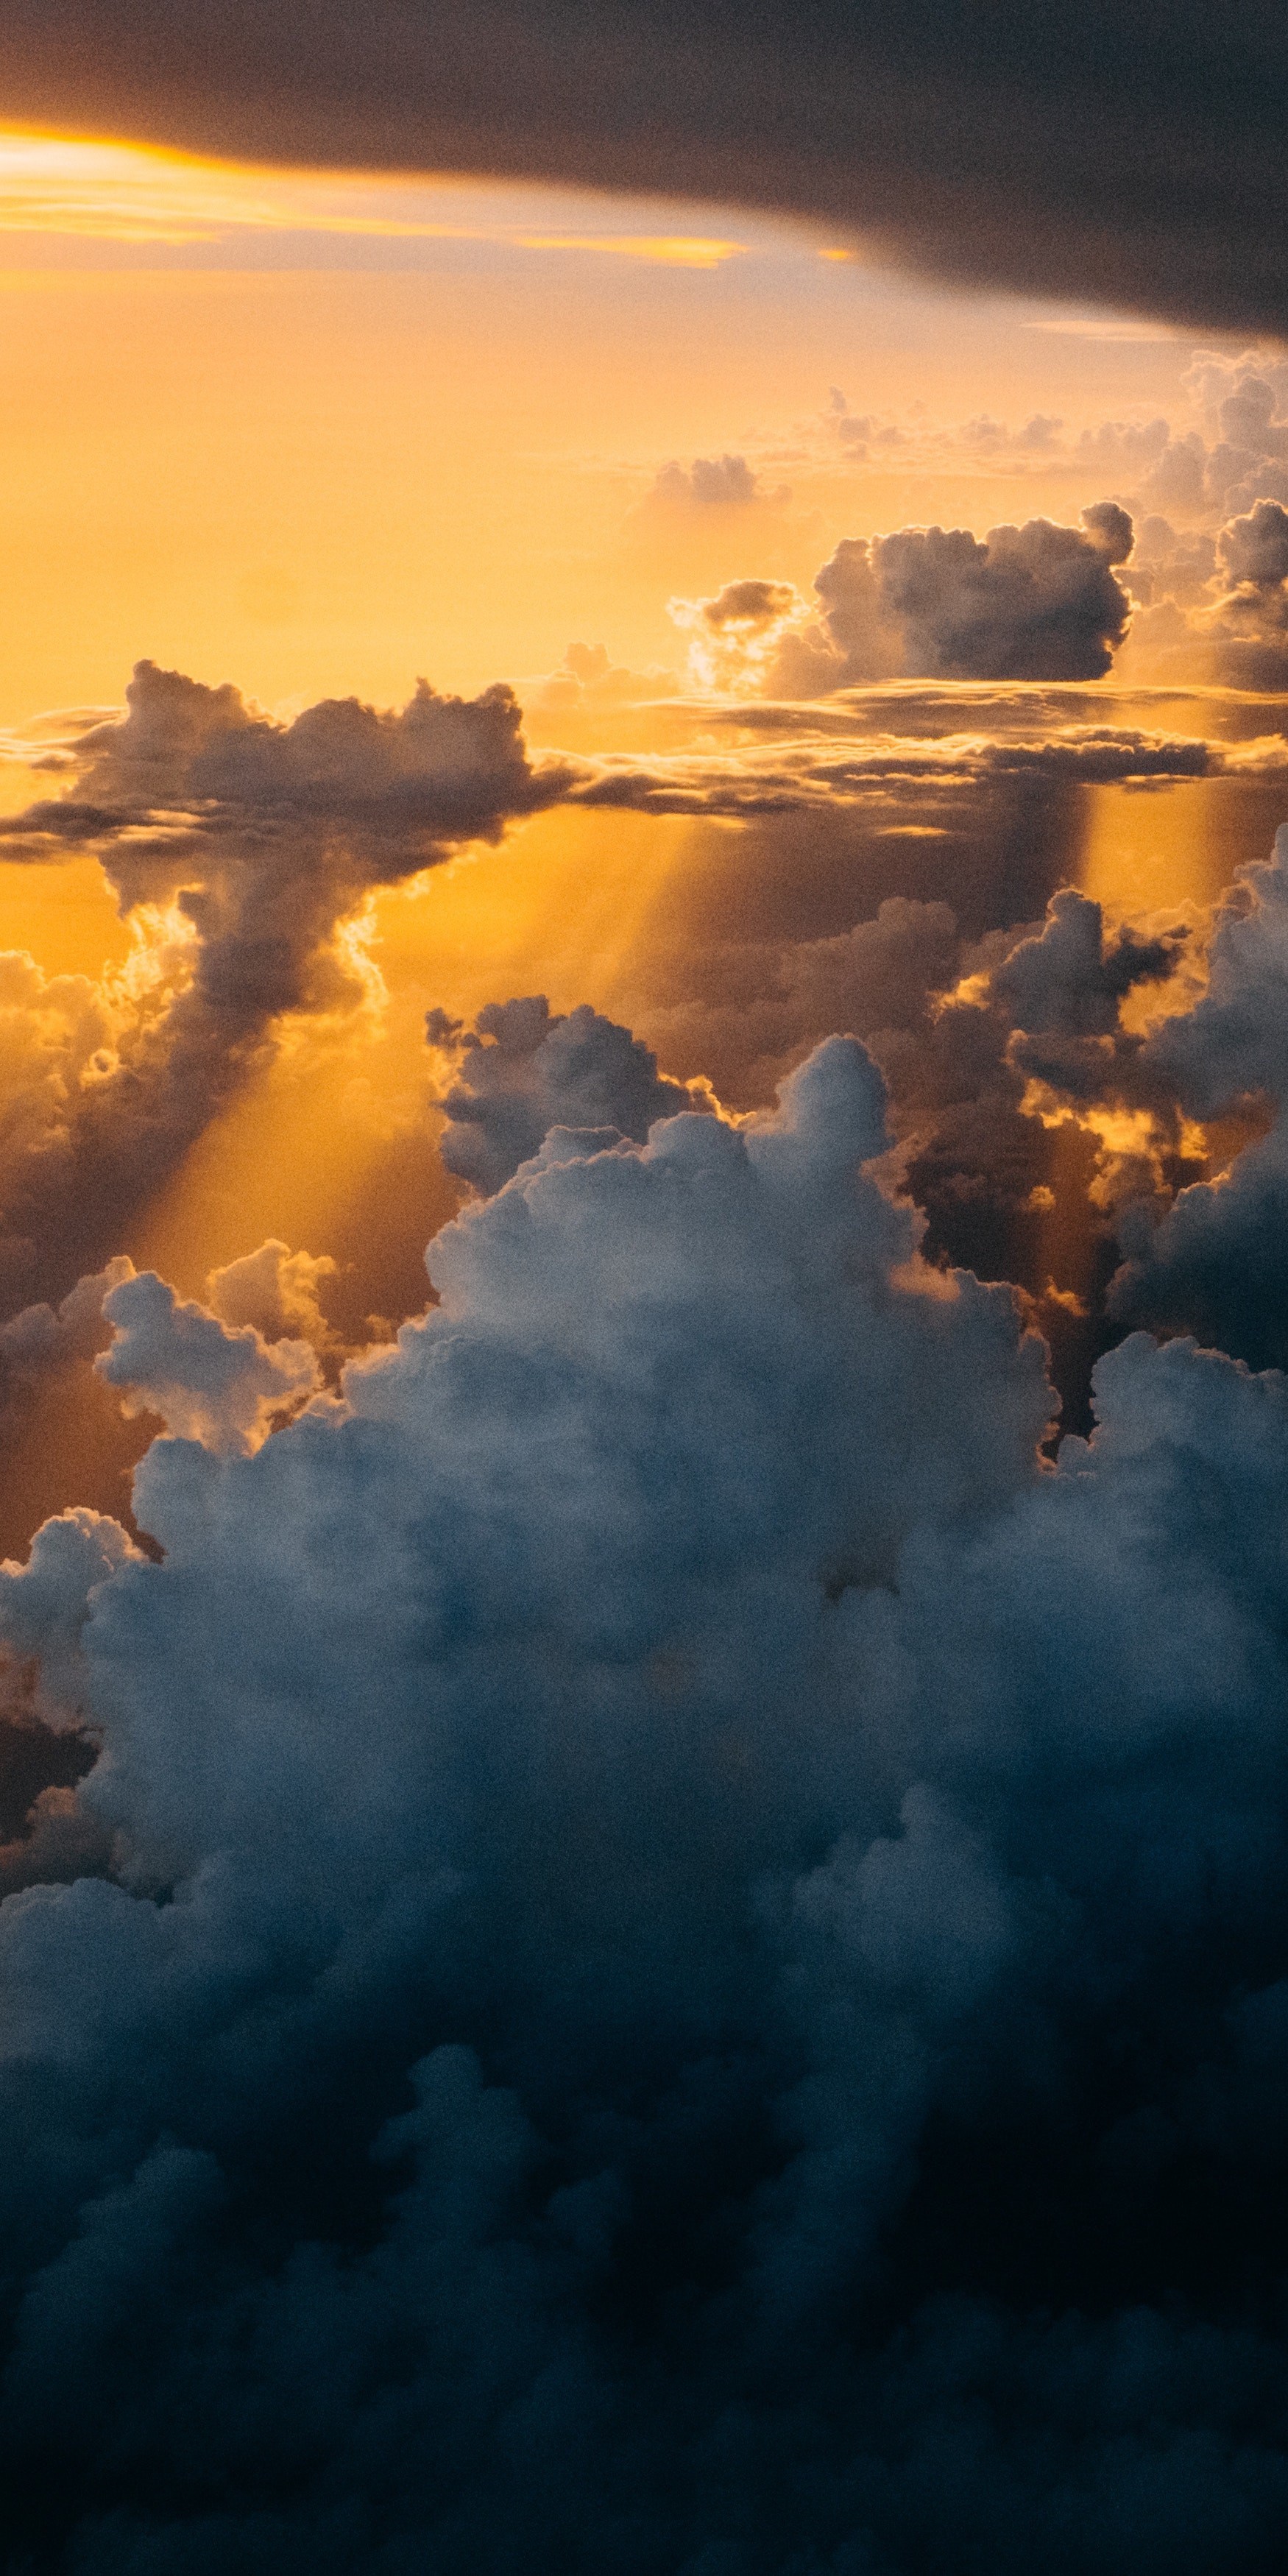 Best Live Wallpaper For Iphone › Picserio - Cloud Wallpaper Iphone X -  1750x3500 Wallpaper 